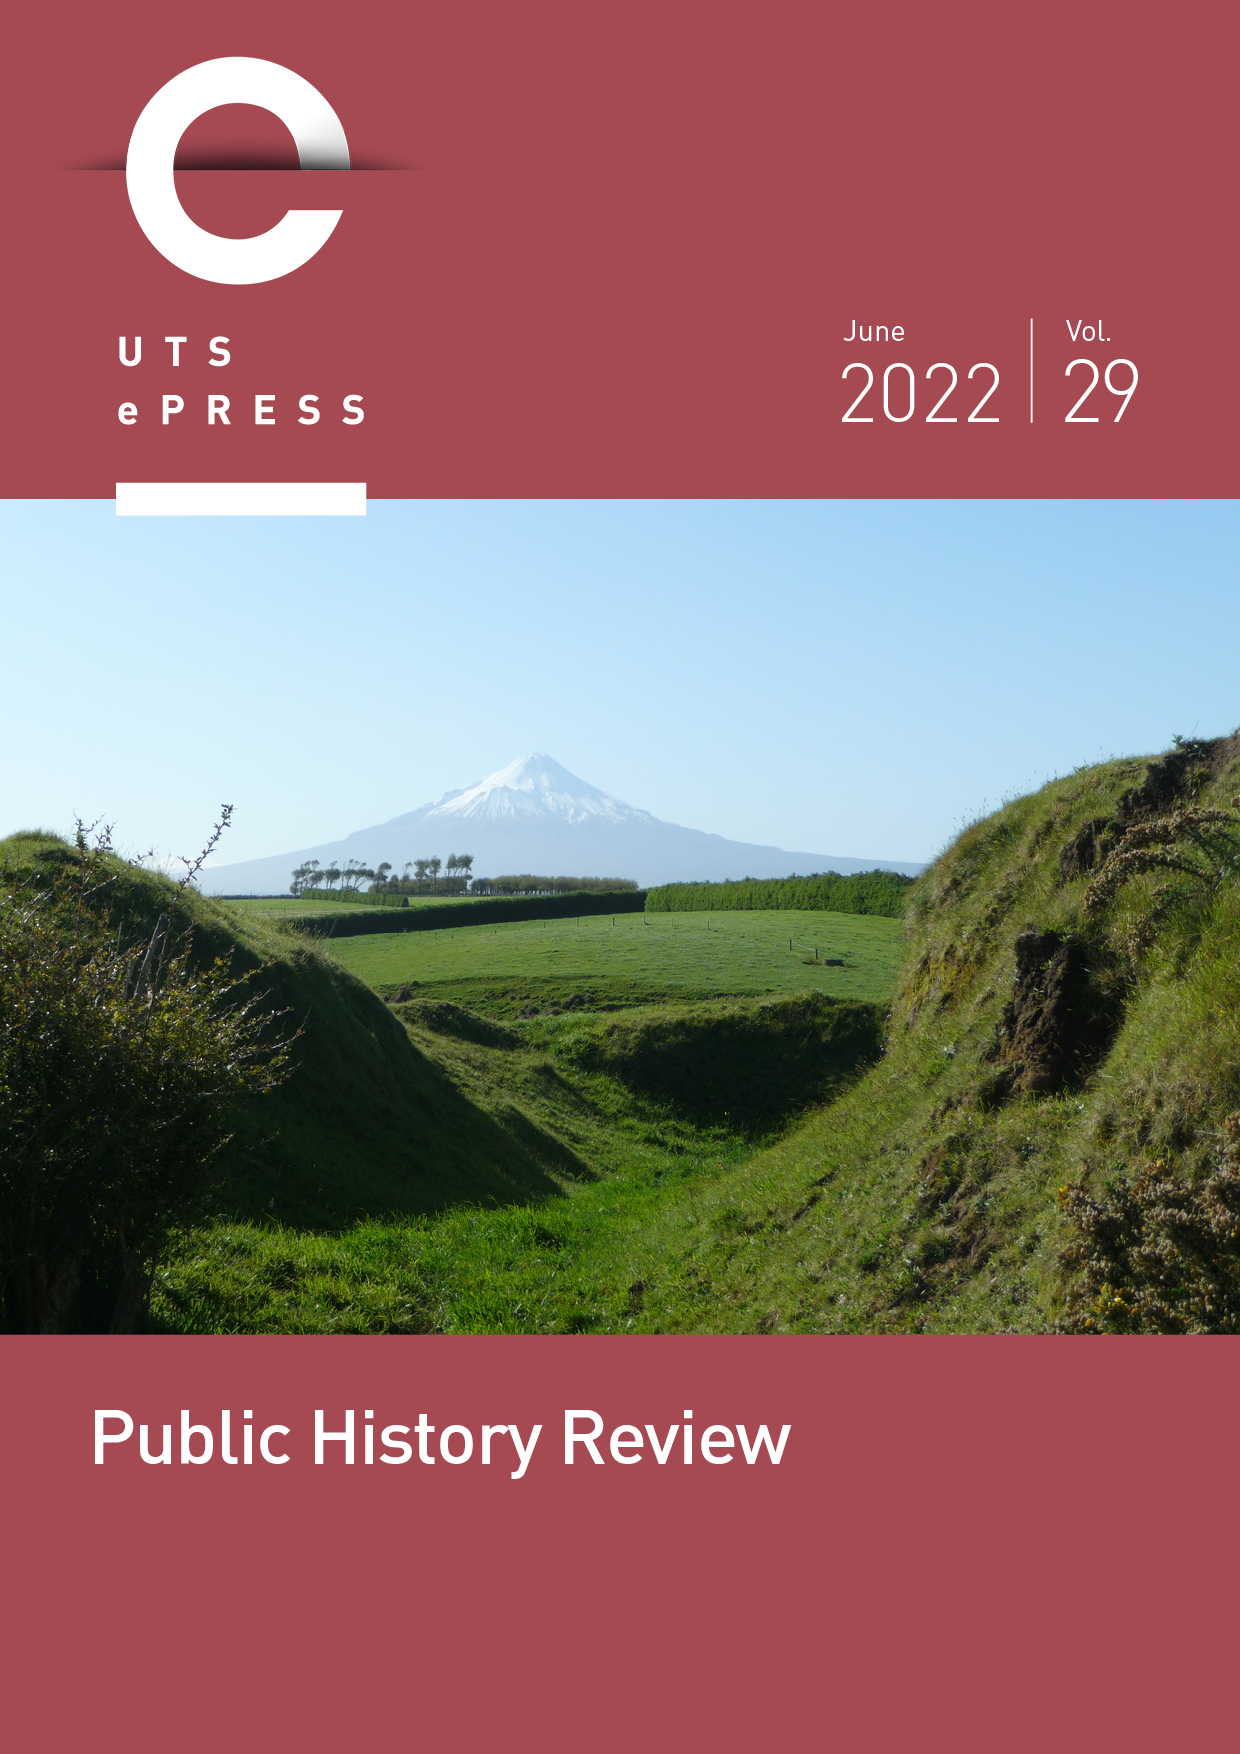 "Public History Review" 2022 Volume 29 cover. Cover image of Taranaki Maunga by Ewen Morris. The work is reproduced with permission.